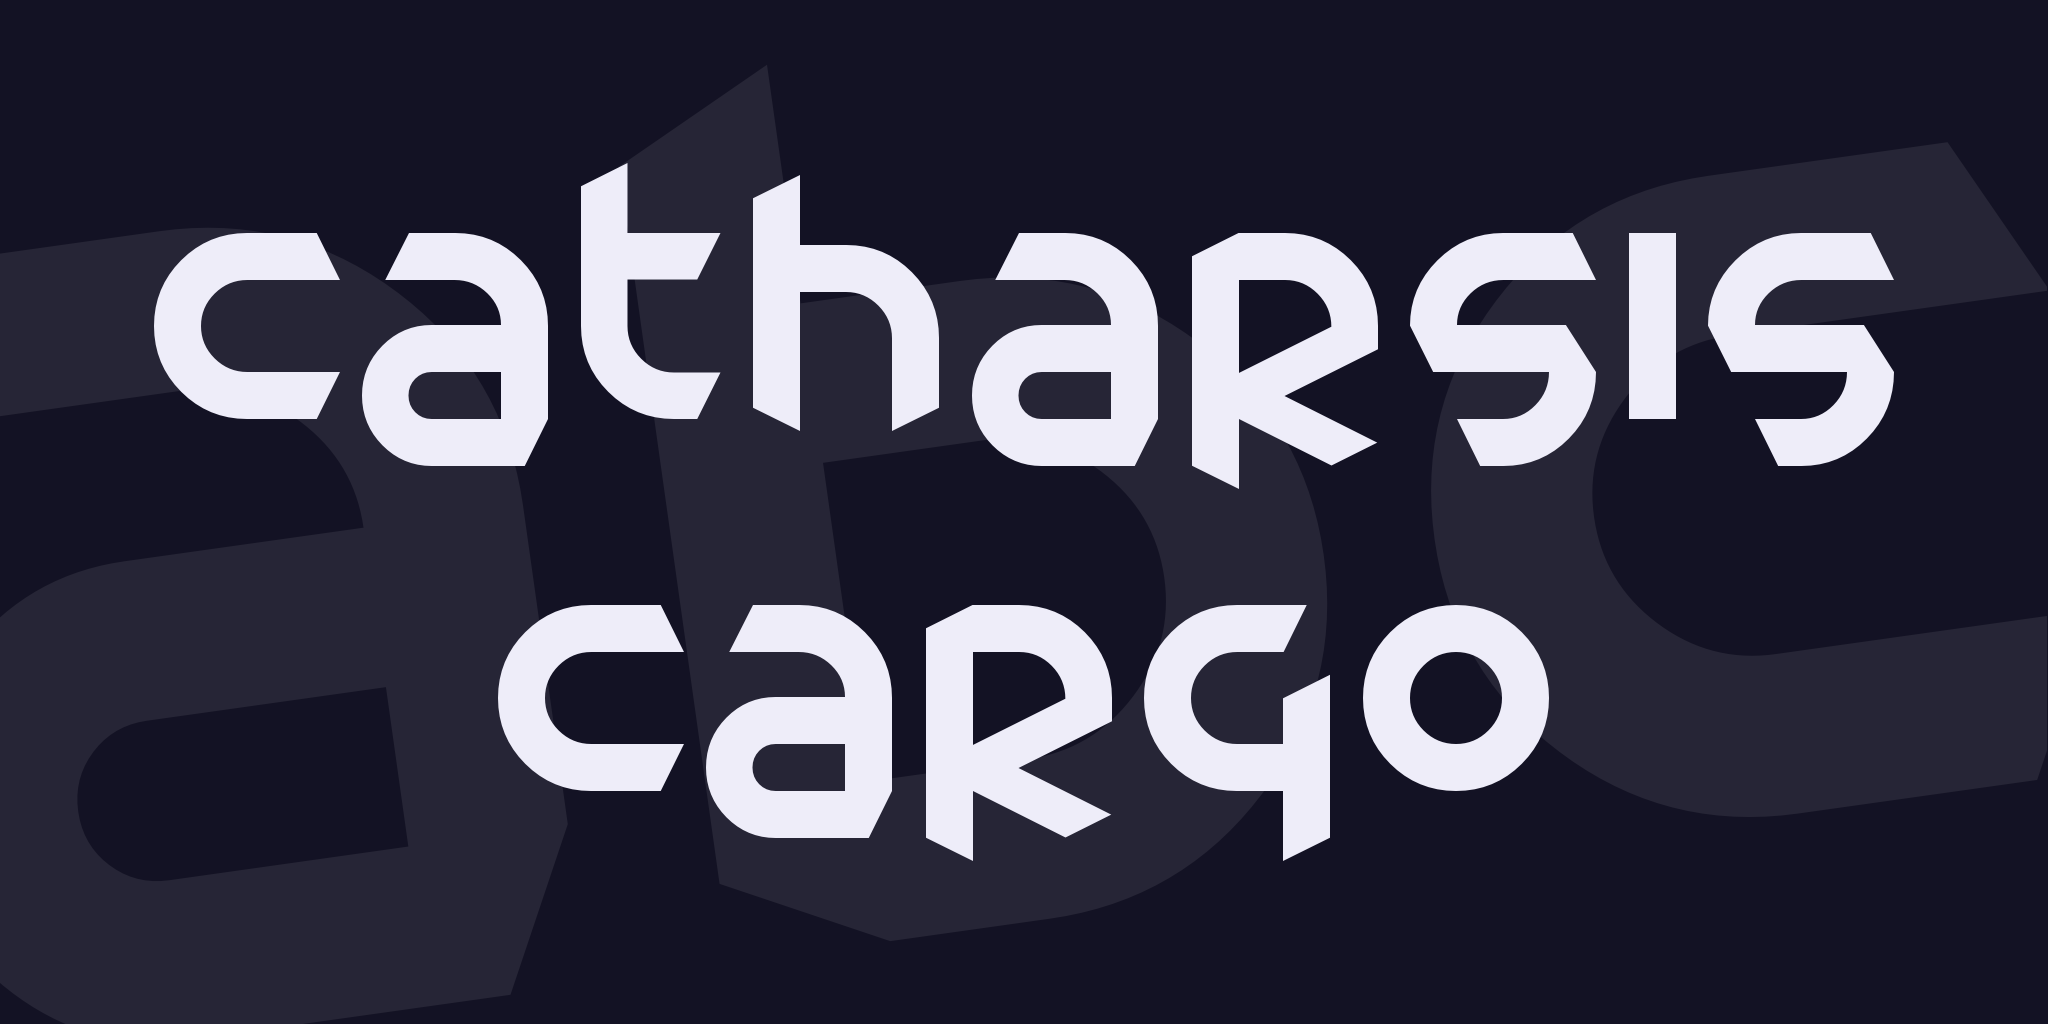 Catharsis Cargo